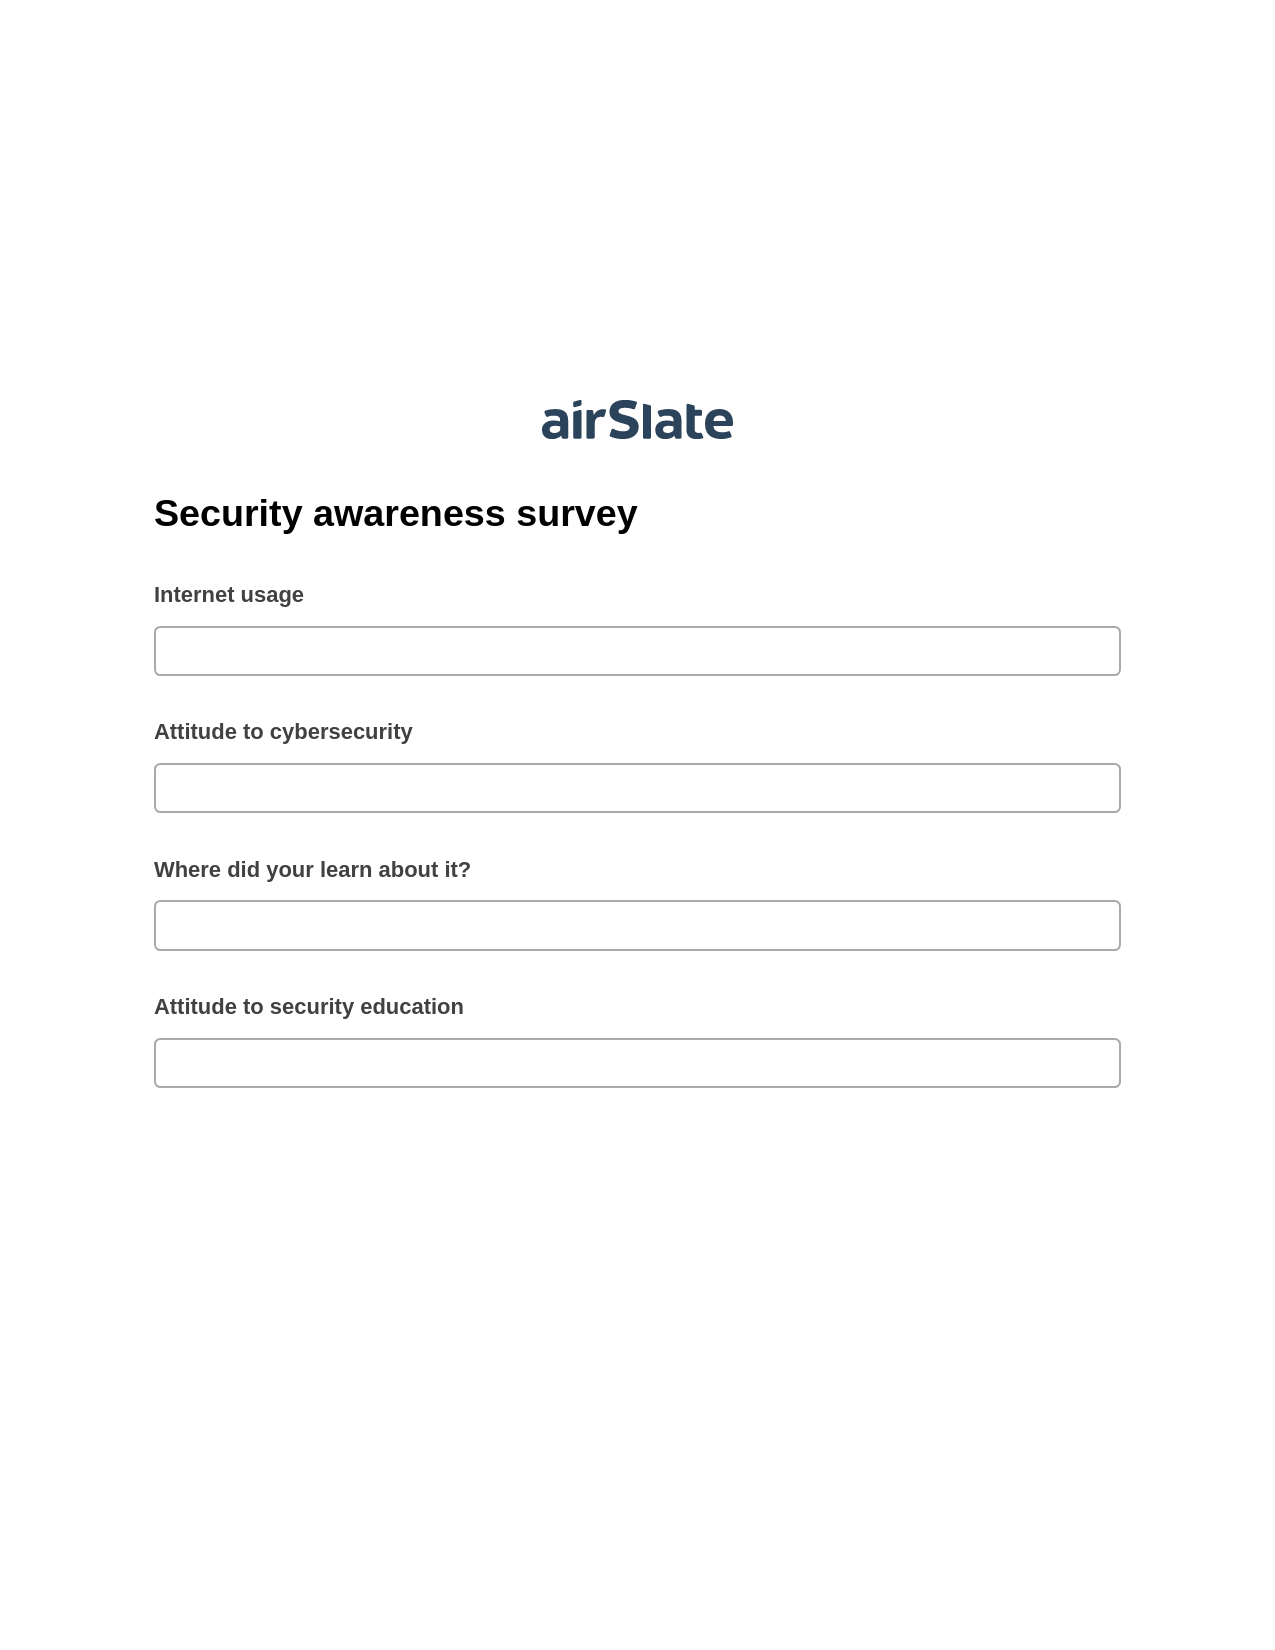 Multirole Security awareness survey Pre-fill from Salesforce Records with SOQL Bot, Lock the slate bot, OneDrive Bot